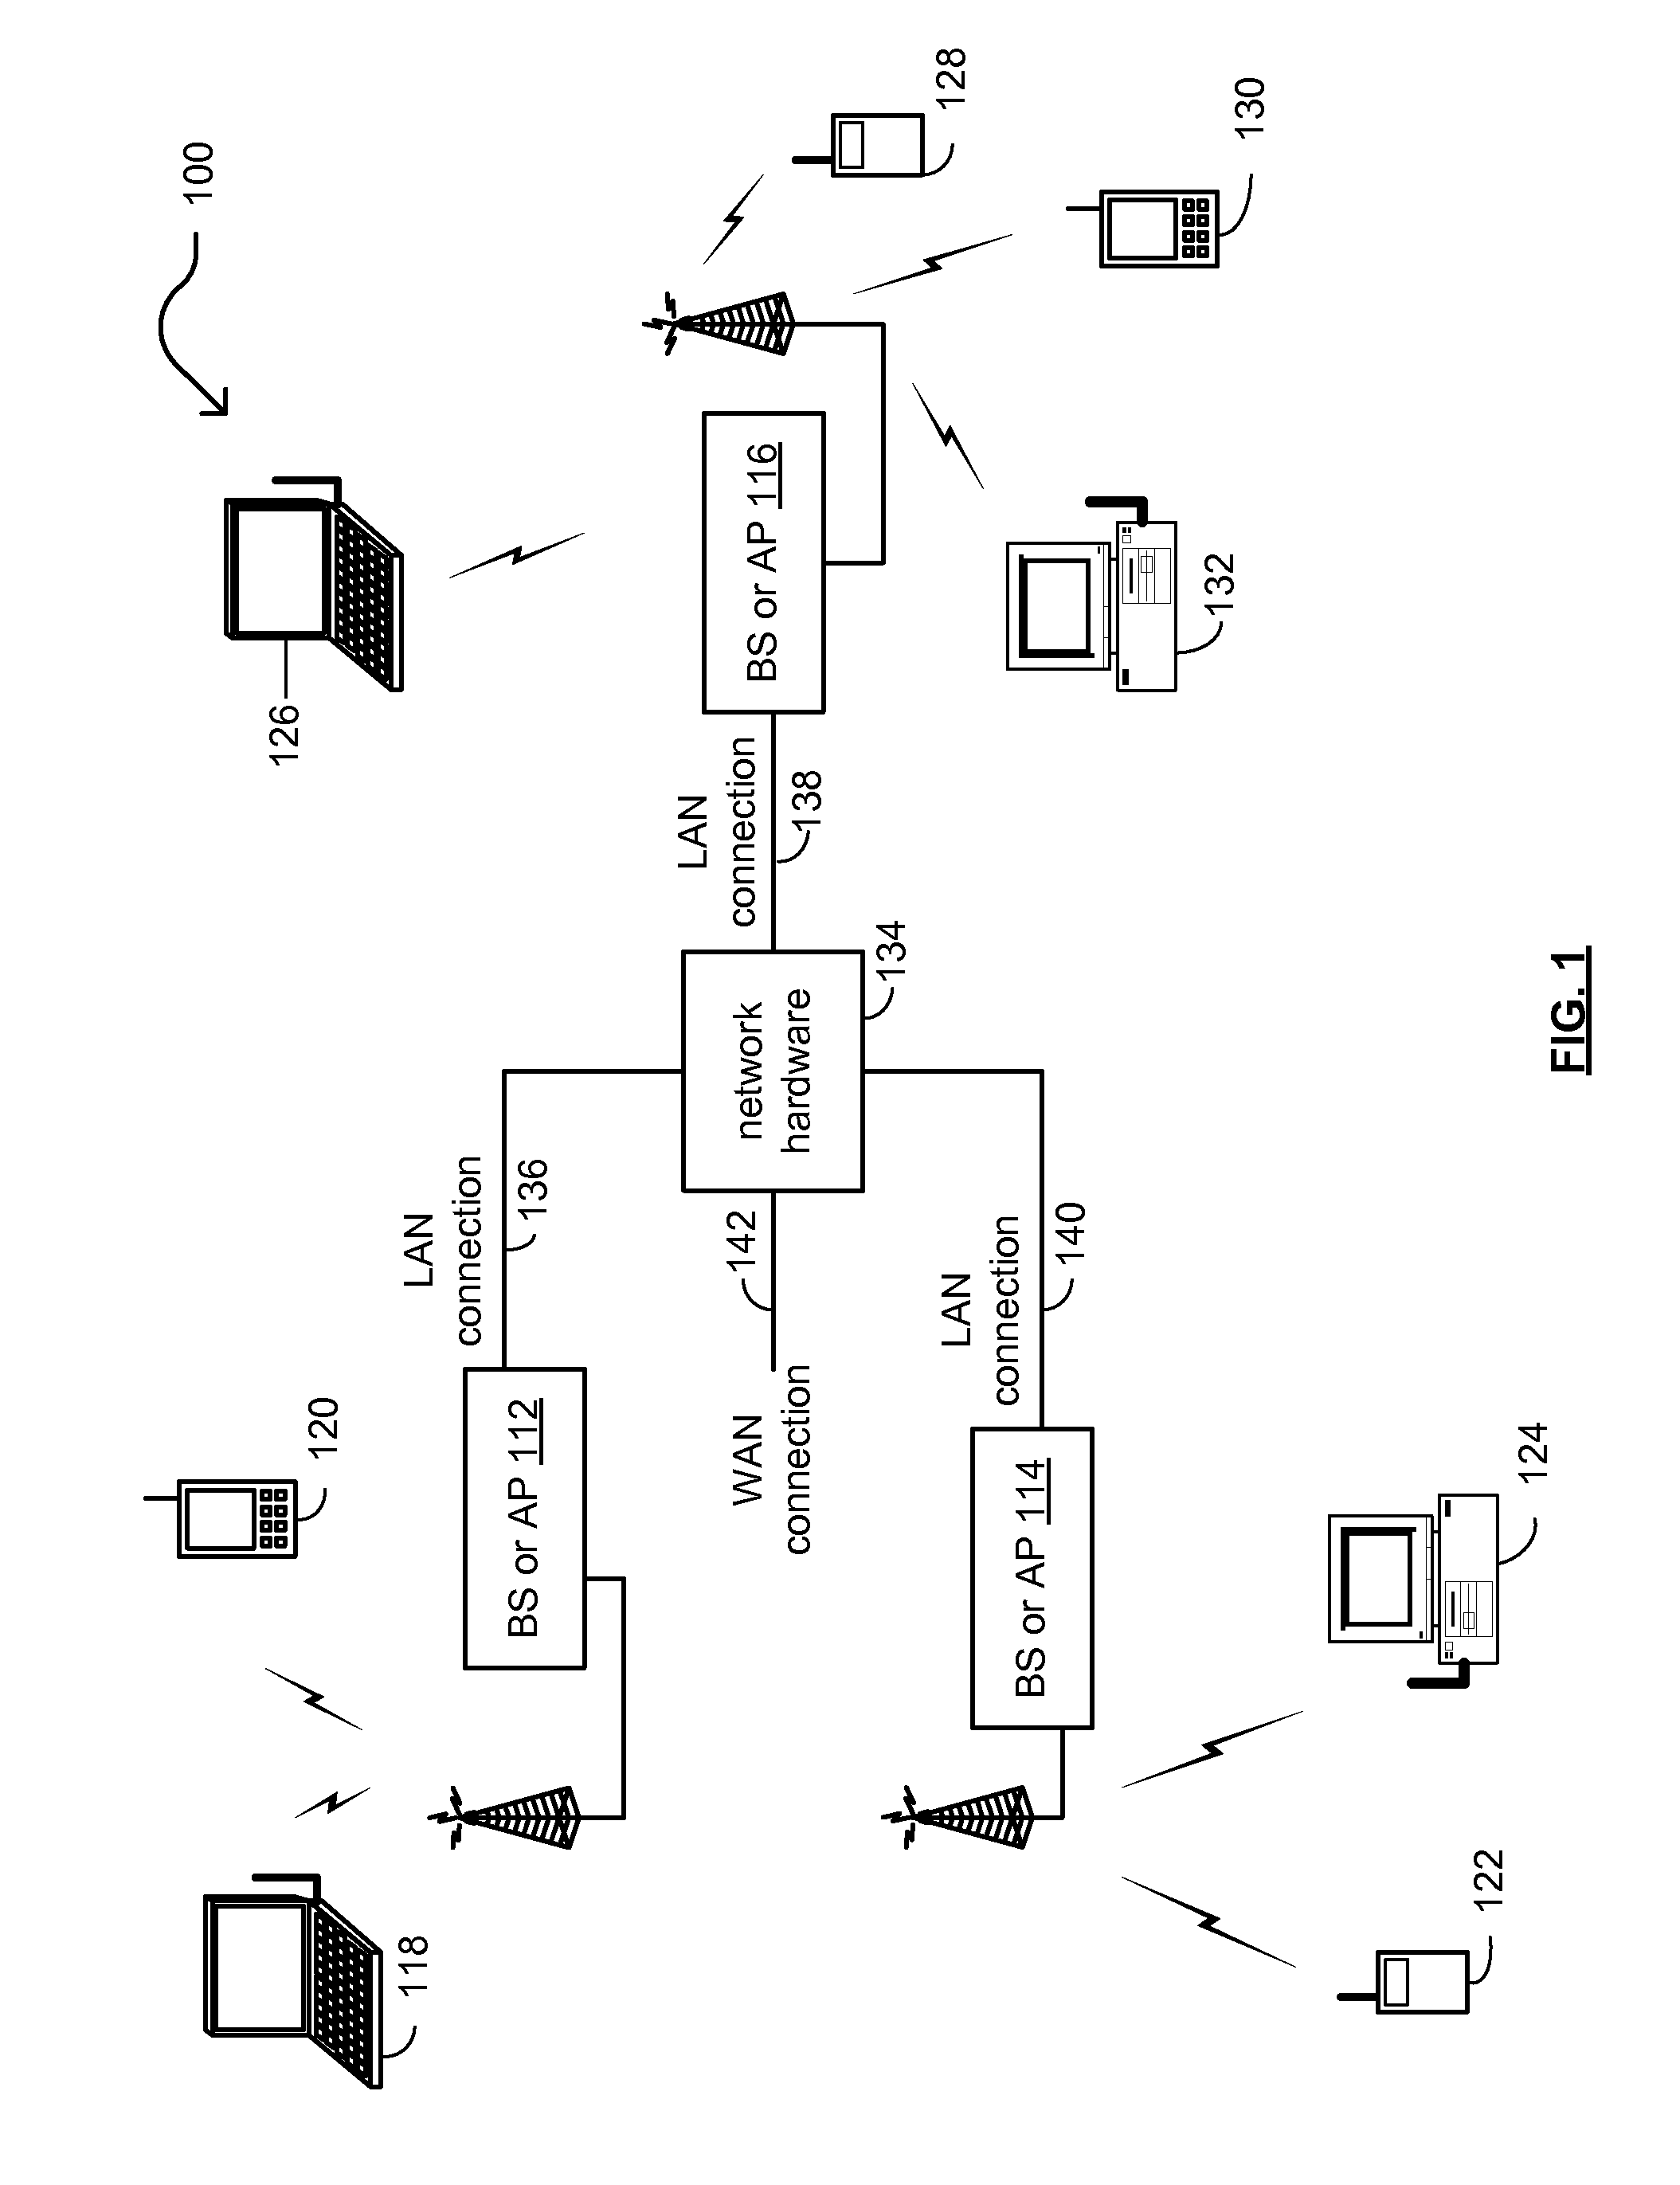 Multiple delivery traffic indication map (DTIM) per device within single user, multiple user, multiple access, and/or MIMO wireless communications